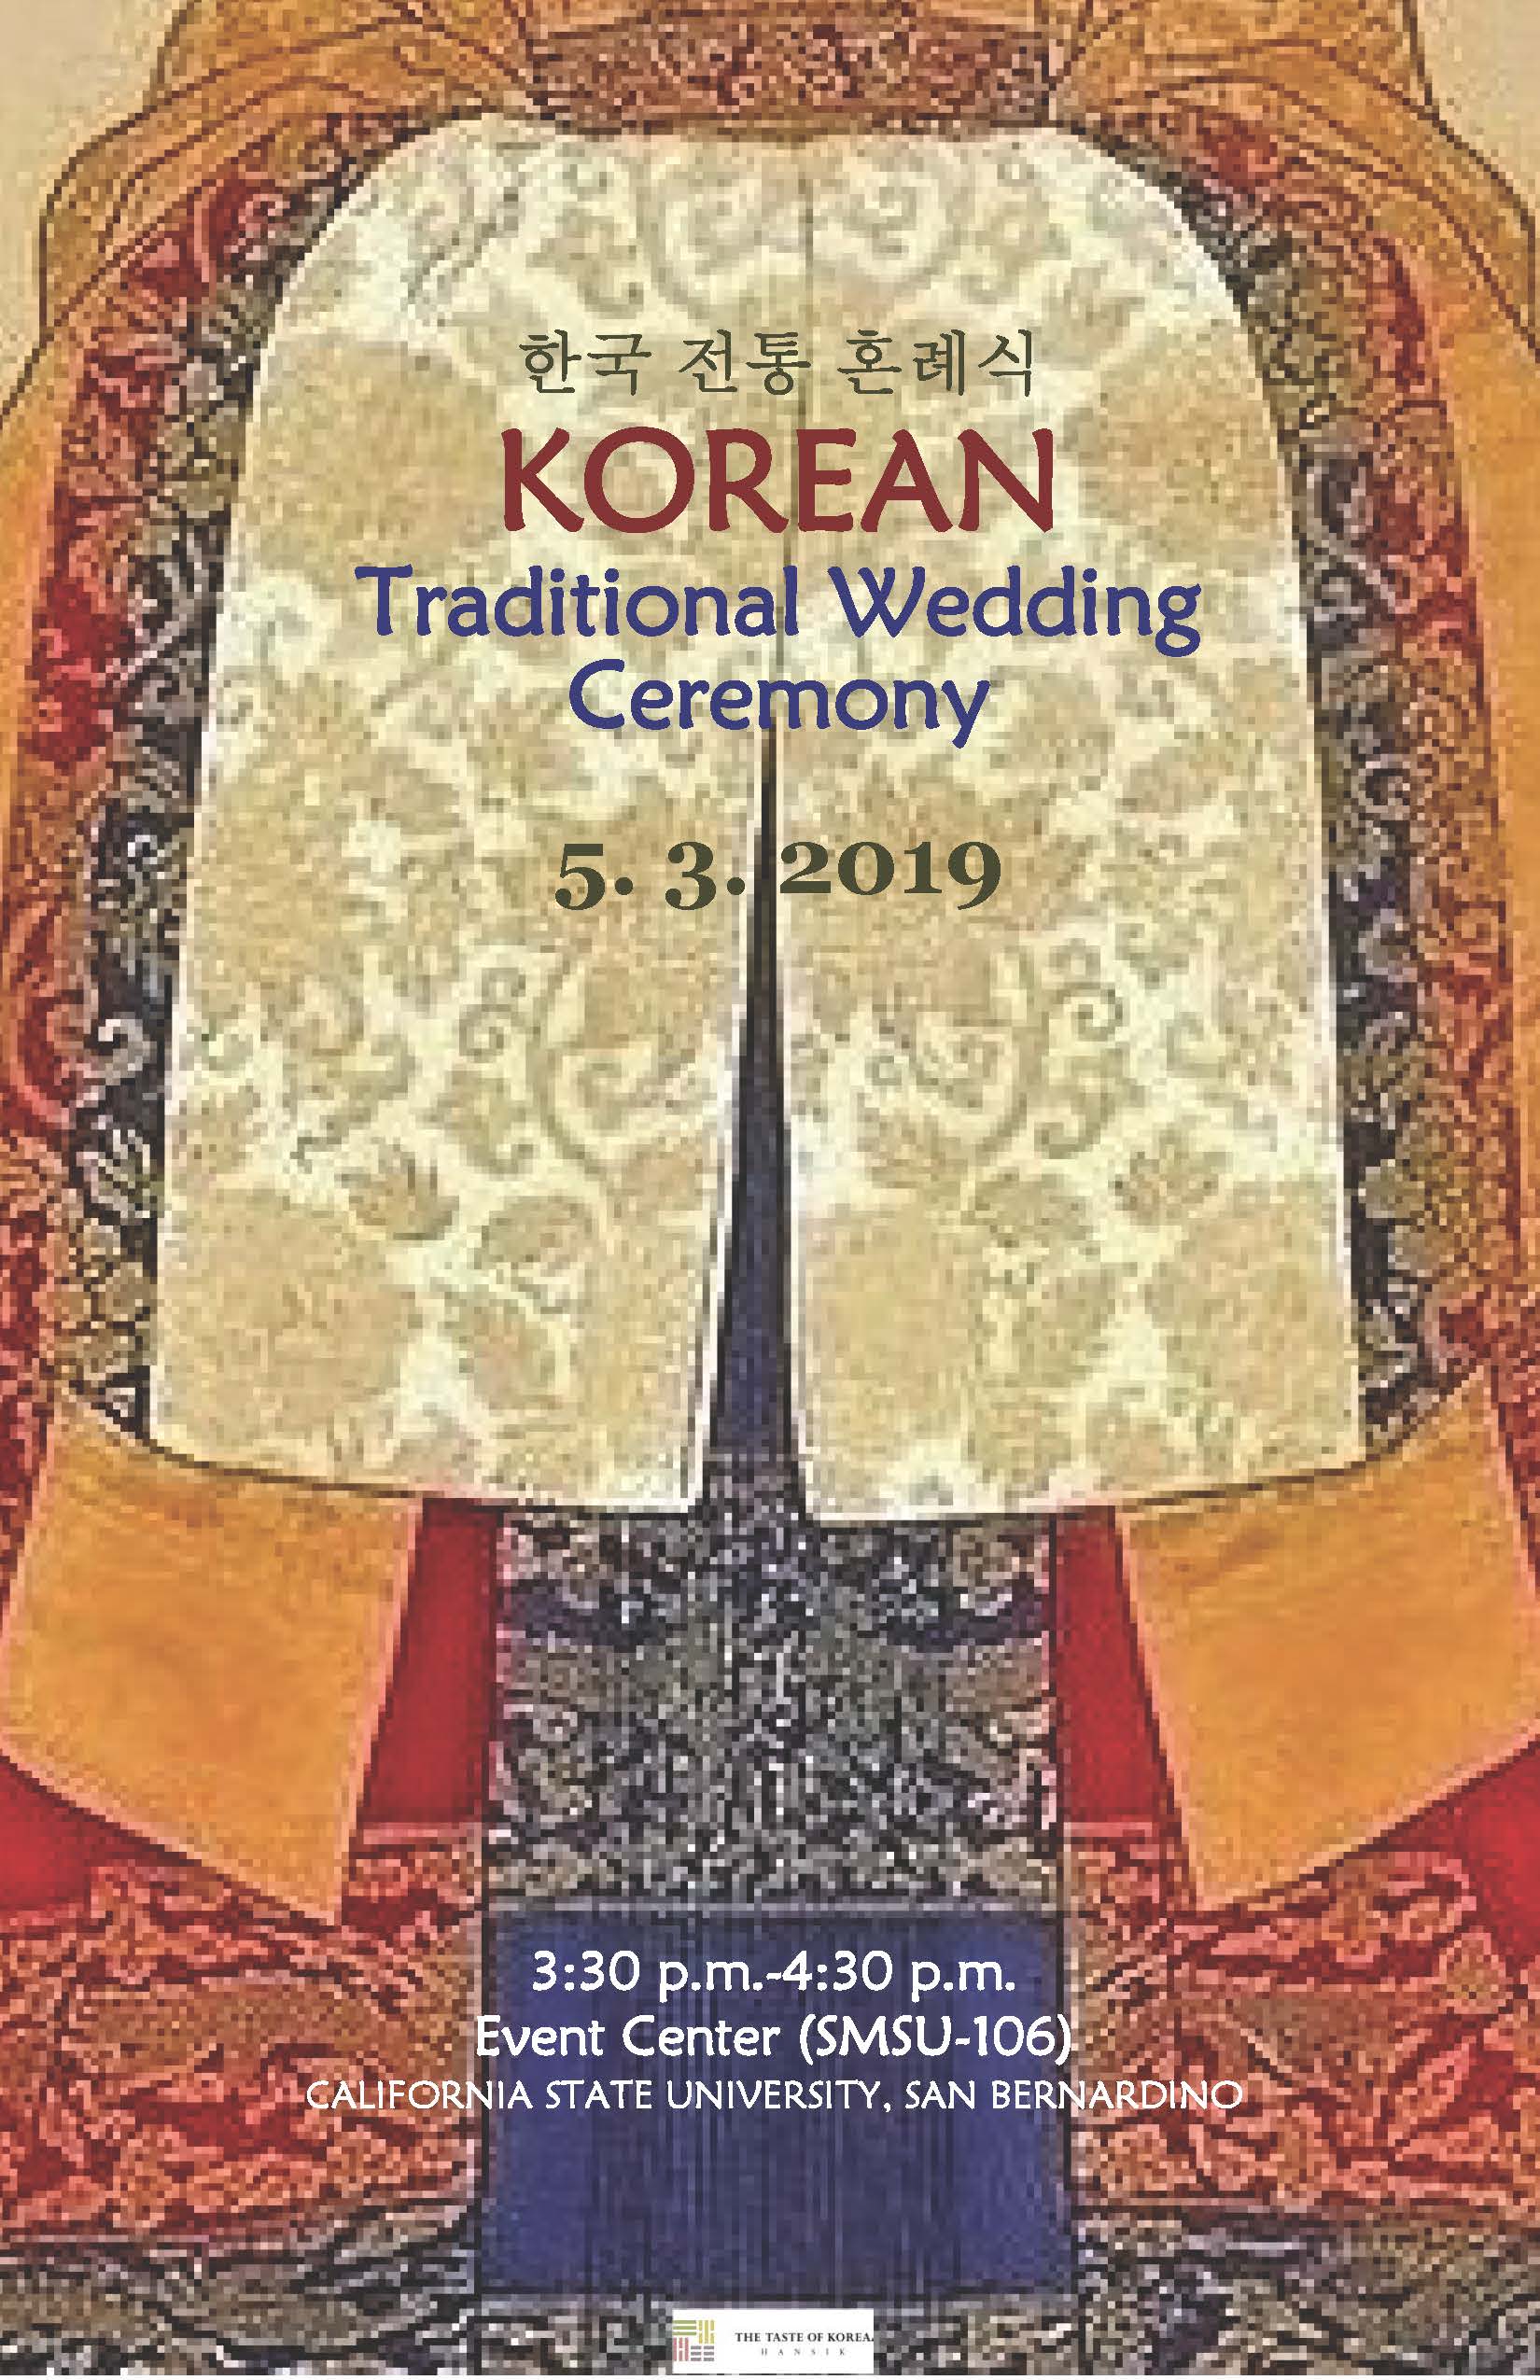 The traditional Korean wedding ceremony, Holyesik, will be from 3:30 to 4:30 p.m. in the SMSU Events Center.